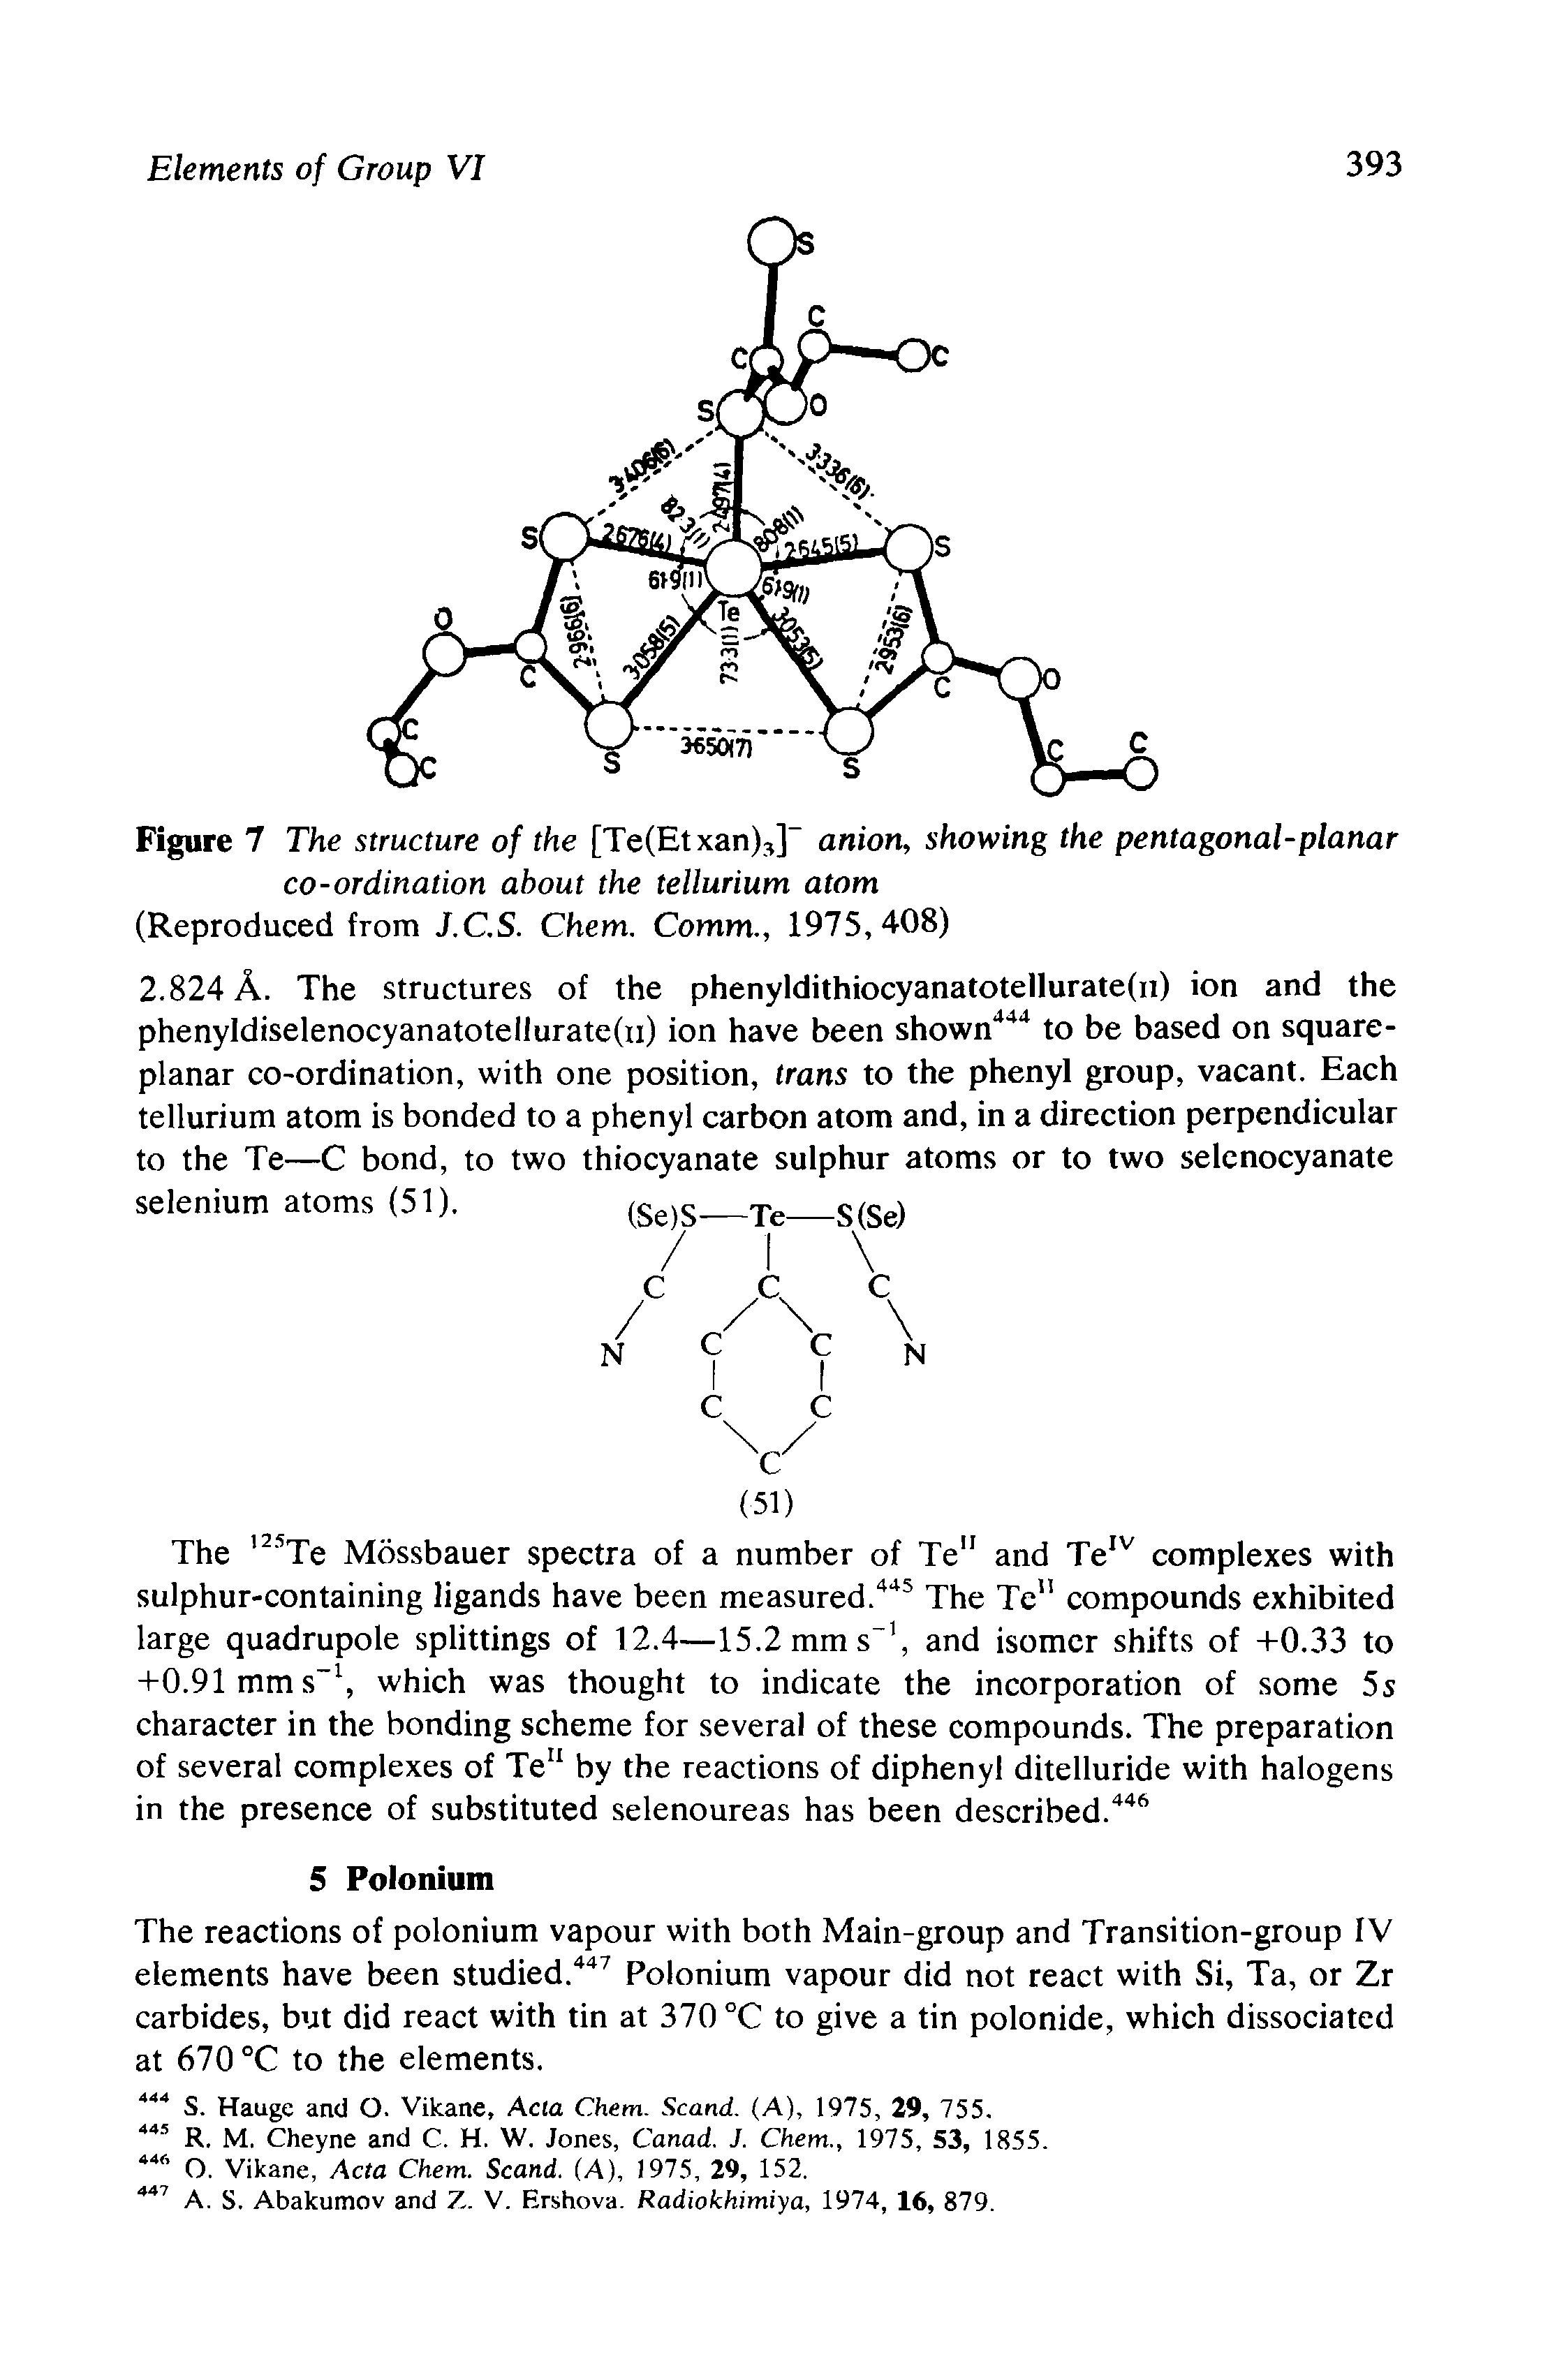 Figure 7 The structure of the [TeCEtxan),] anion, showing the pentagonal-planar co-ordination about the tellurium atom (Reproduced from J.CS. Chem. Comm., 1975,408)...